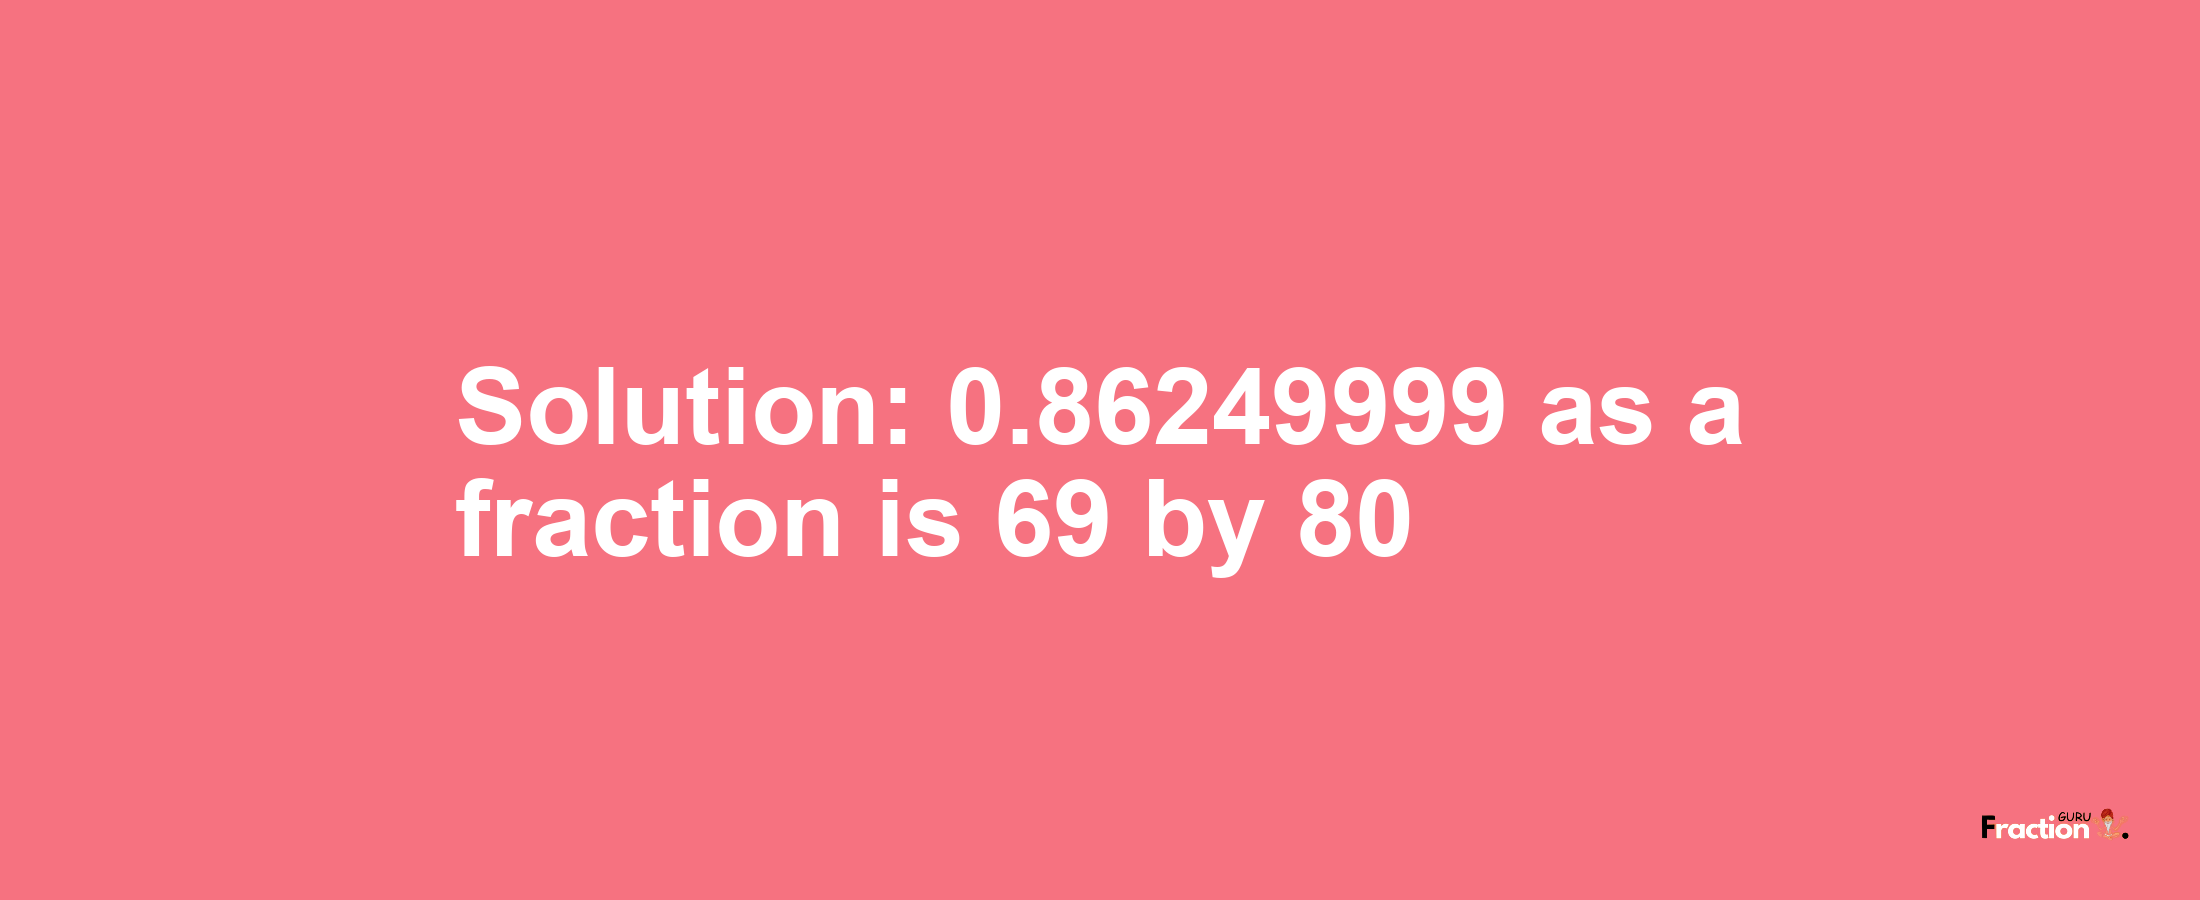 Solution:0.86249999 as a fraction is 69/80